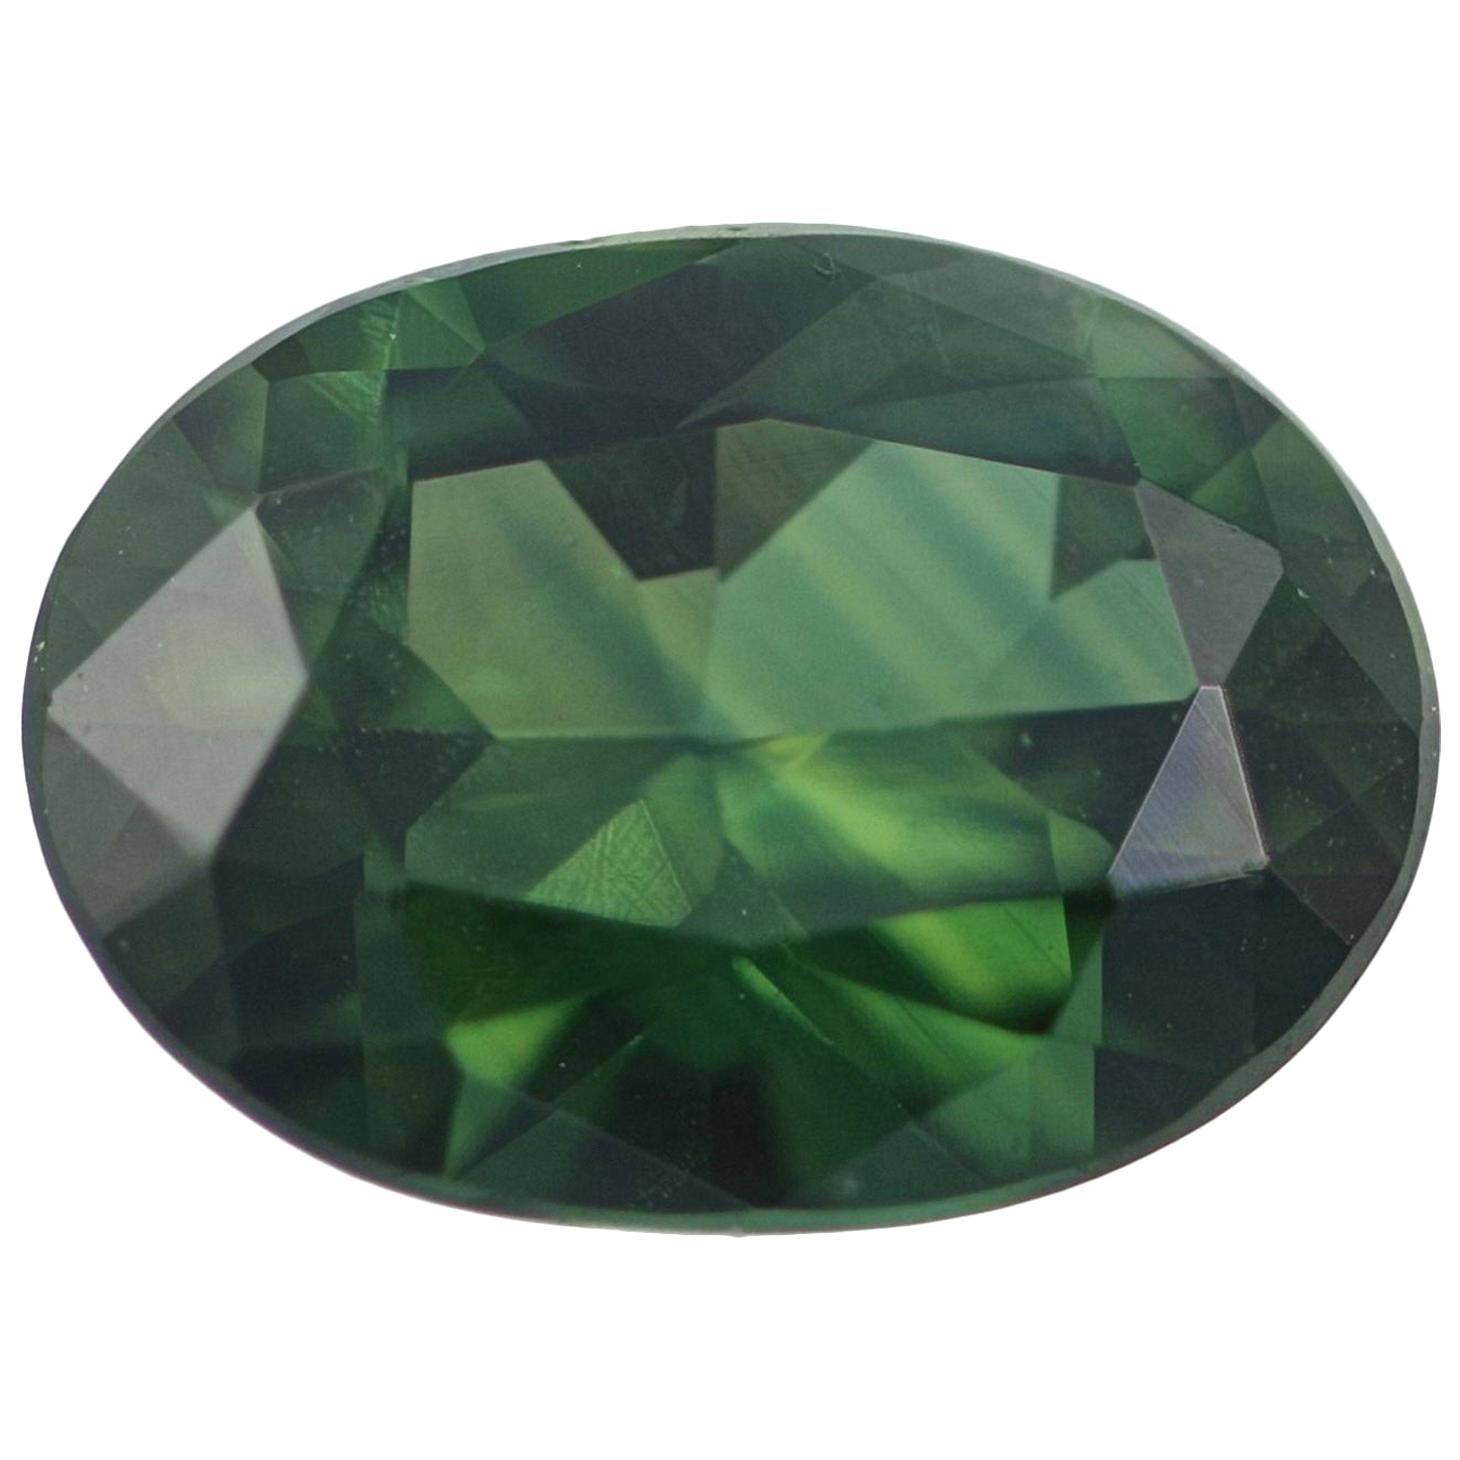 Loose Sapphire, Oval Cut 1.22 Carat Green Solitaire